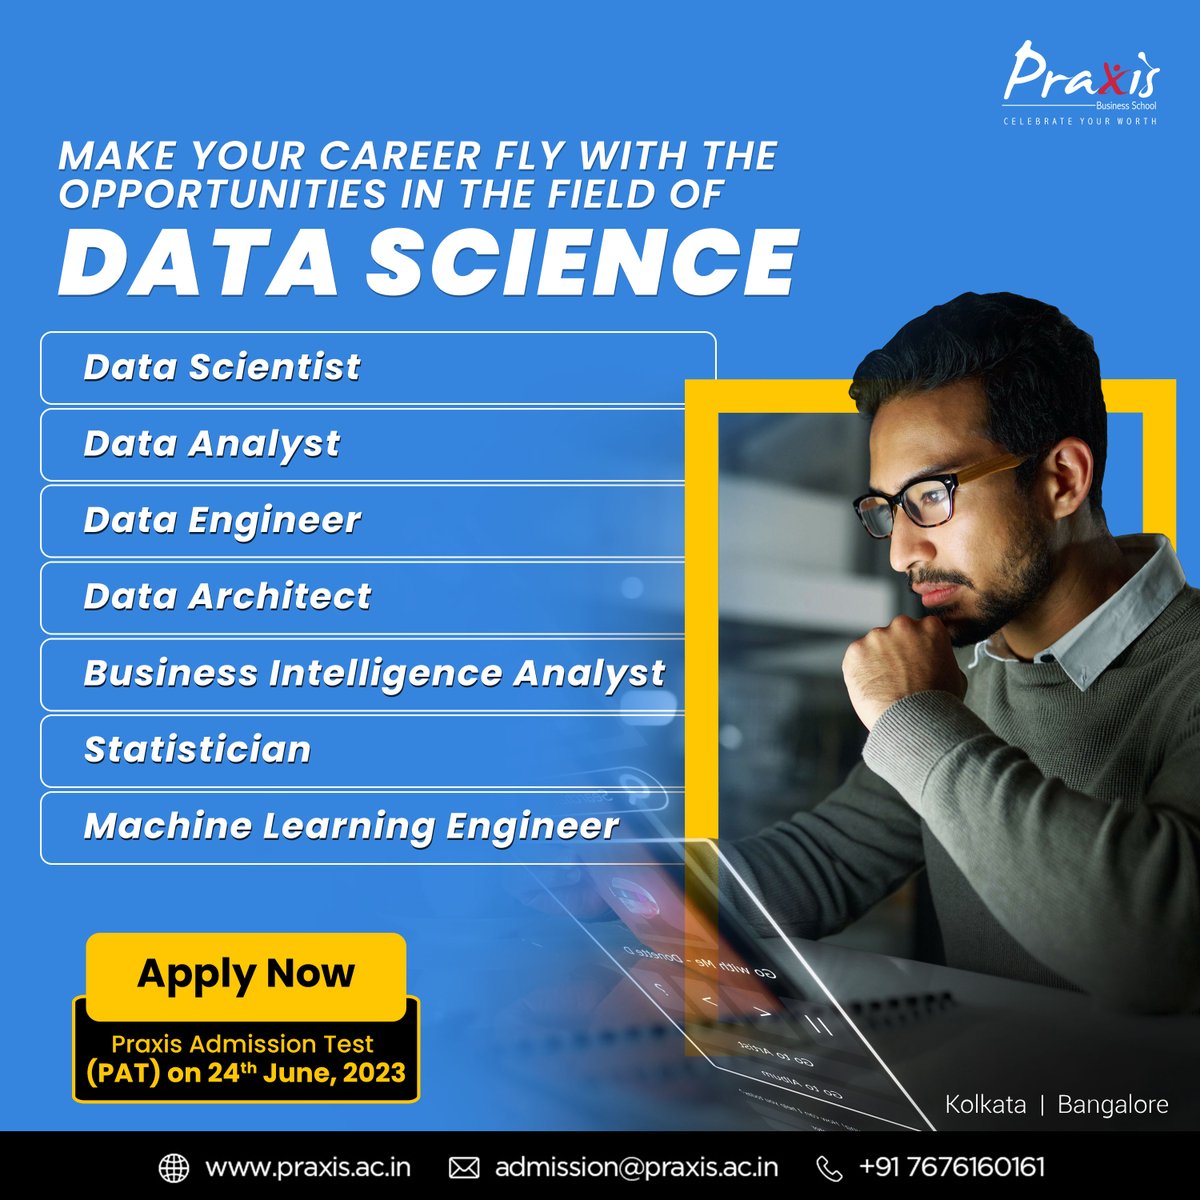 Unlock the endless possibilities in the world of data science and soar to new heights in your career! 🚀✨ 

Visit: praxis.ac.in or call us at +917676160161 
 
#DataScience #CareerOpportunities #DataScientist #DataAnalyst #DataEngineer #DataArchitect #BIAnalyst